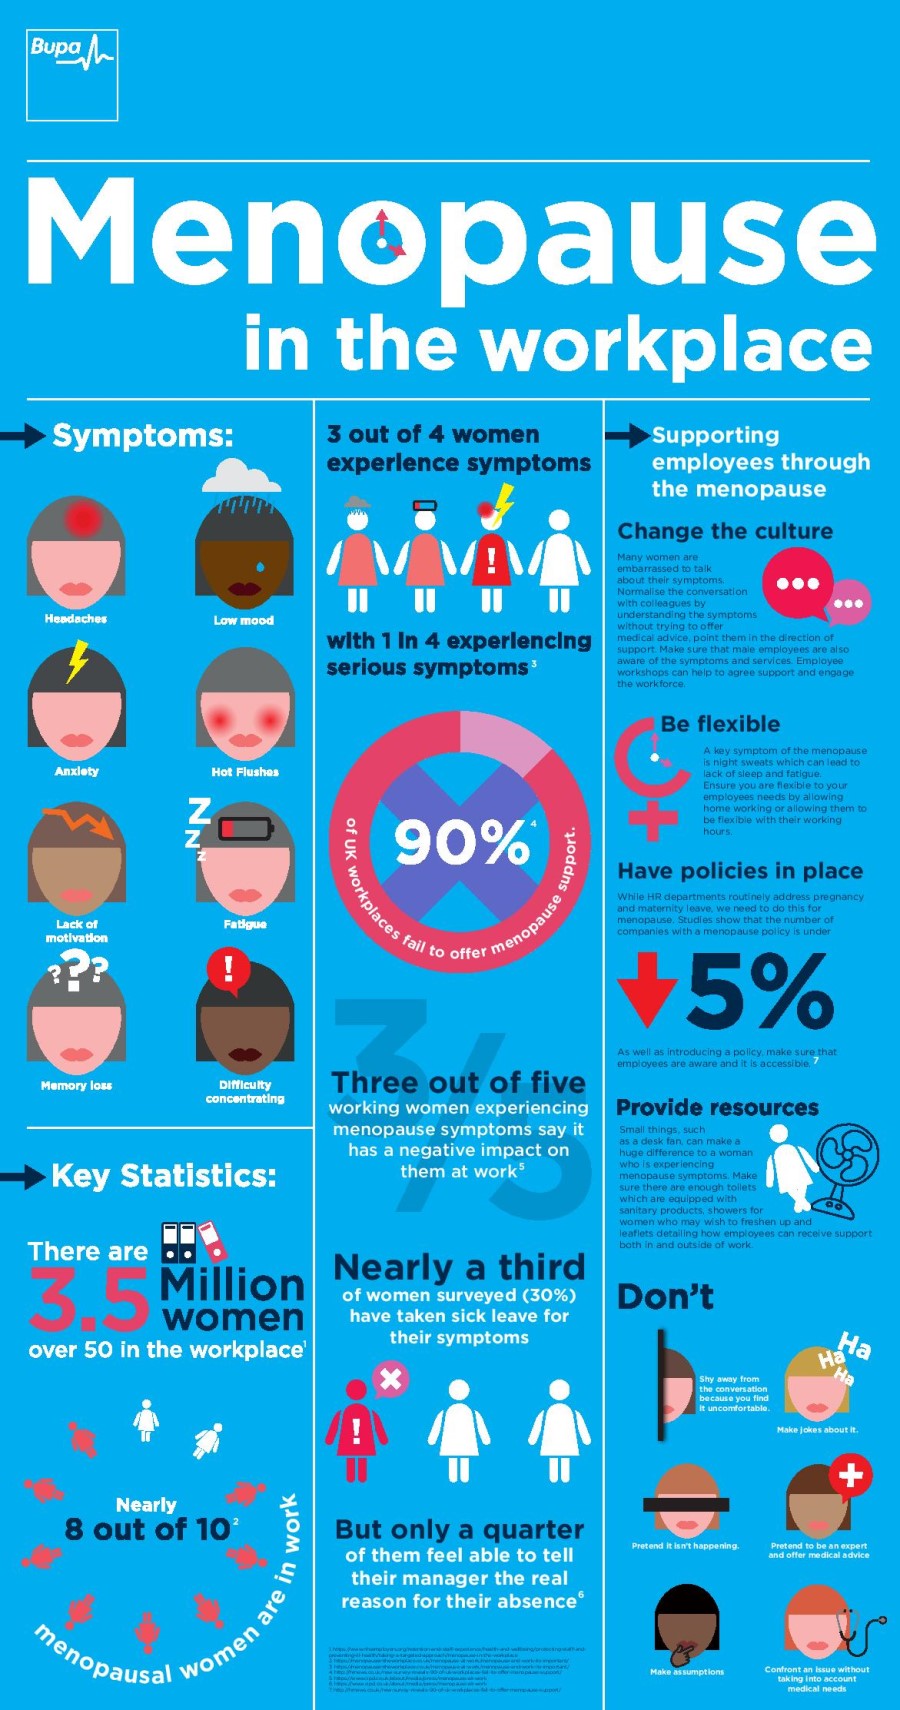 D167-1589357919_FINALMENOPAUSEINTHEWORKPLACEINFOGRAPHIC-page-0011BUPA.jpg